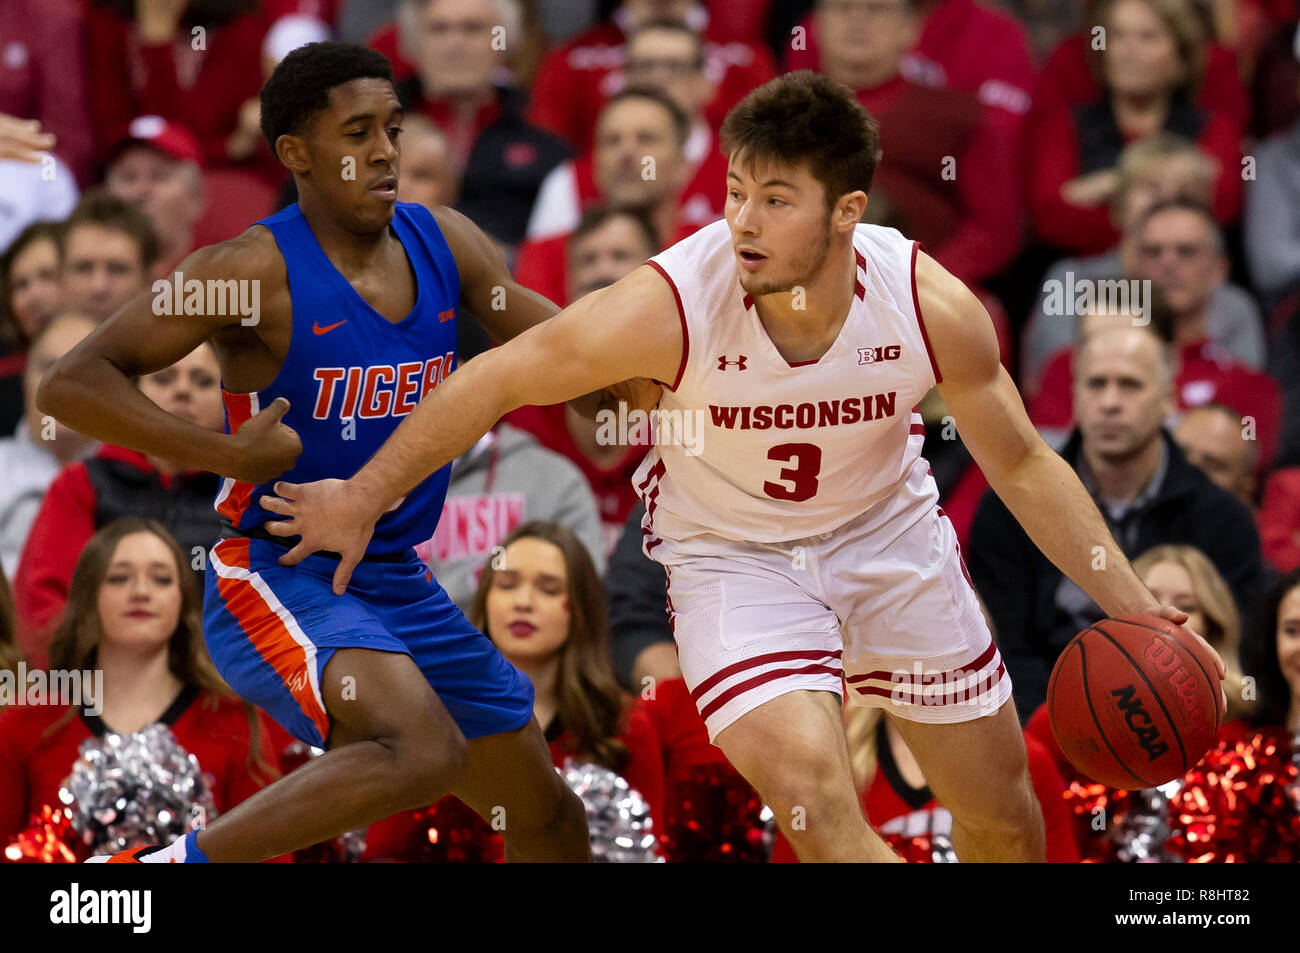 Madison, WI, USA. 13th Dec, 2018. Wisconsin Badgers guard Walt McGrory #3 in action during the NCAA Basketball game between the Savannah State Tigers and the Wisconsin Badgers at the Kohl Center in Madison, WI. Badgers defeated the Tigers 101- 60. John Fisher/CSM/Alamy Live News Stock Photo